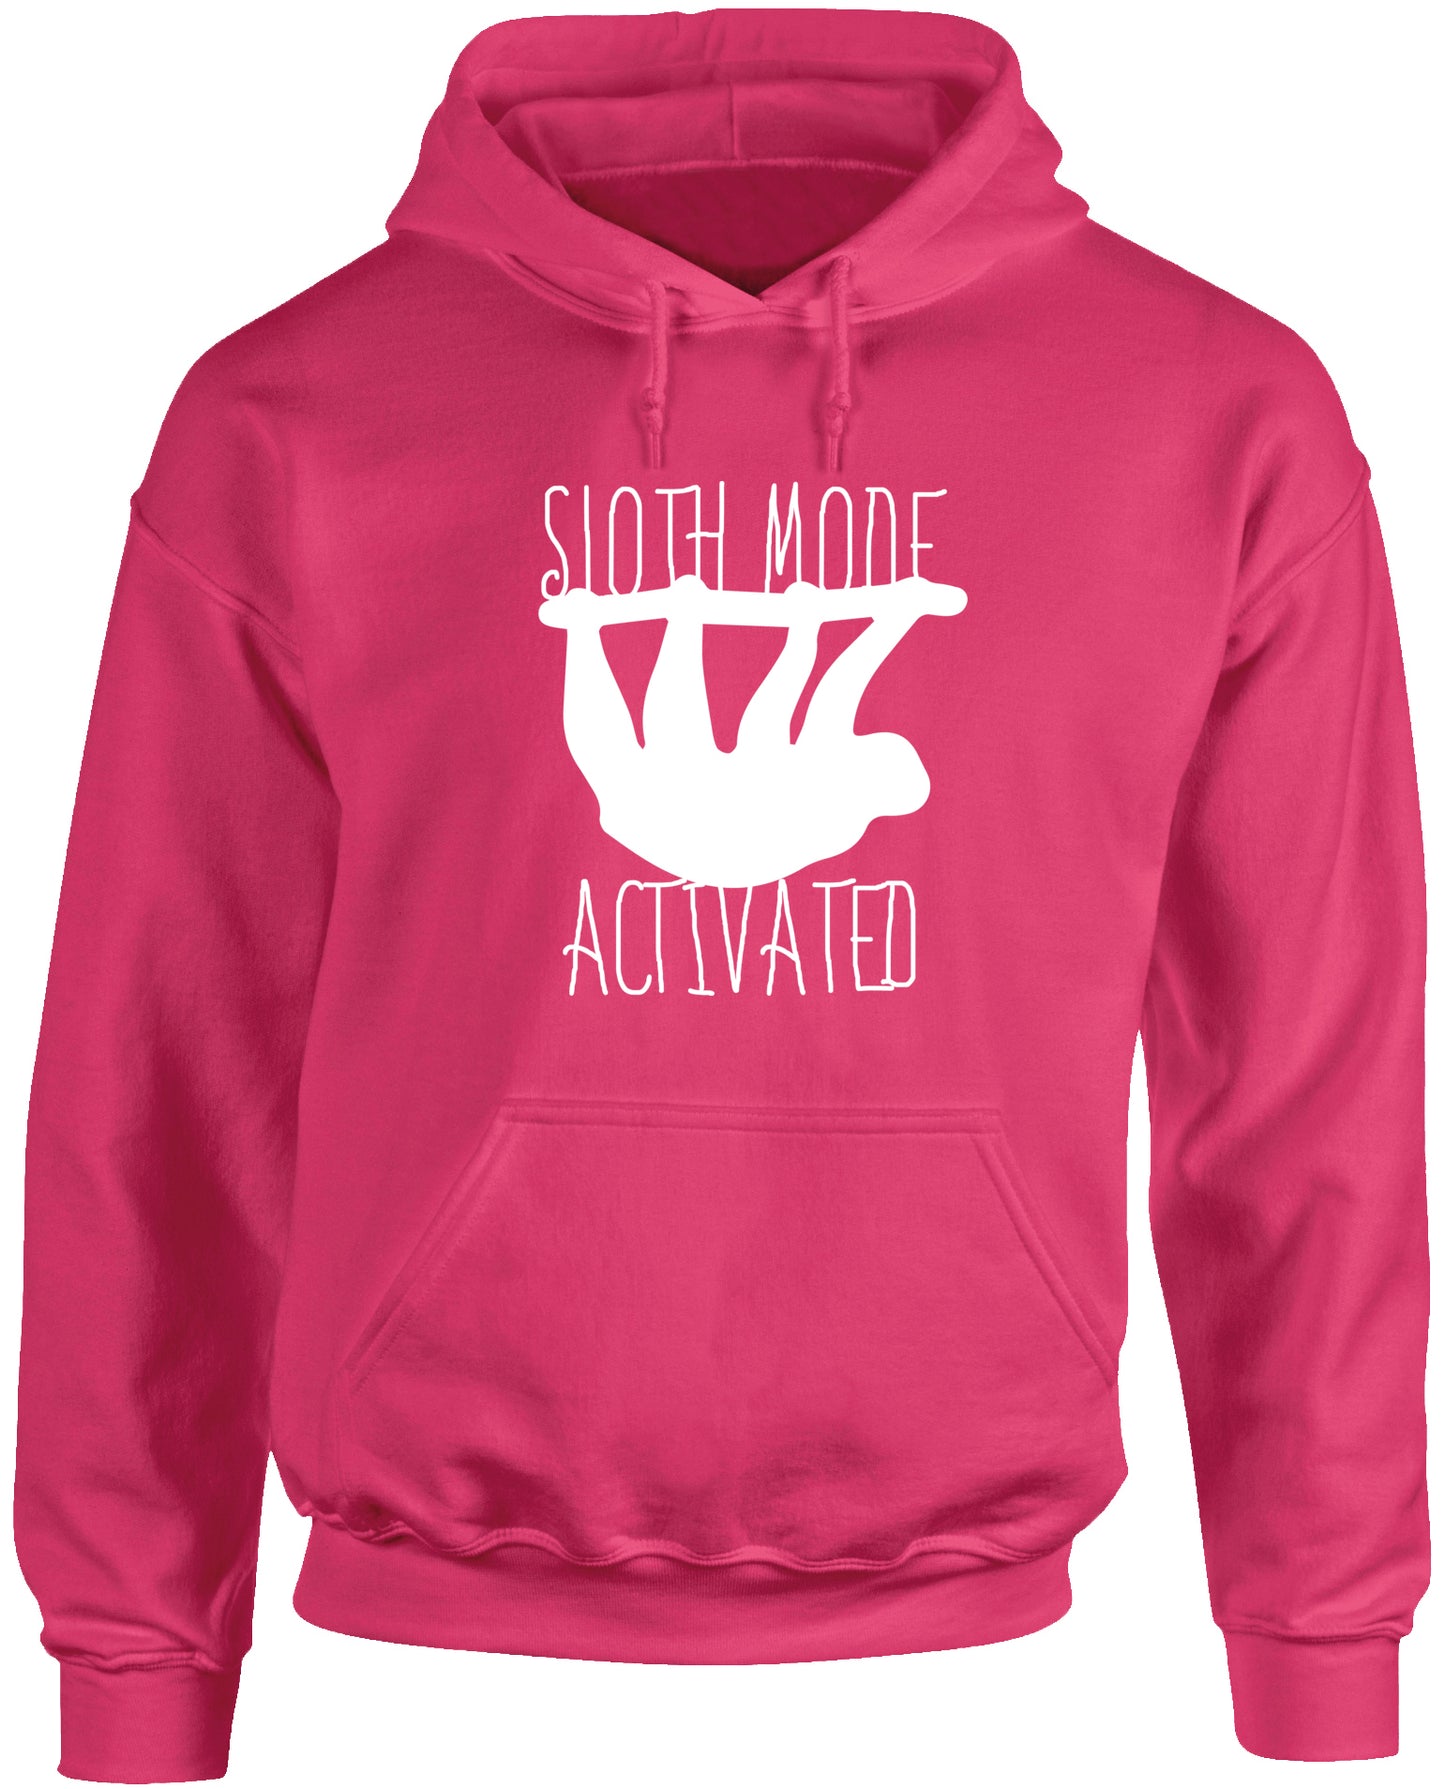 Sloth mode activated unisex Hoodie hooded top